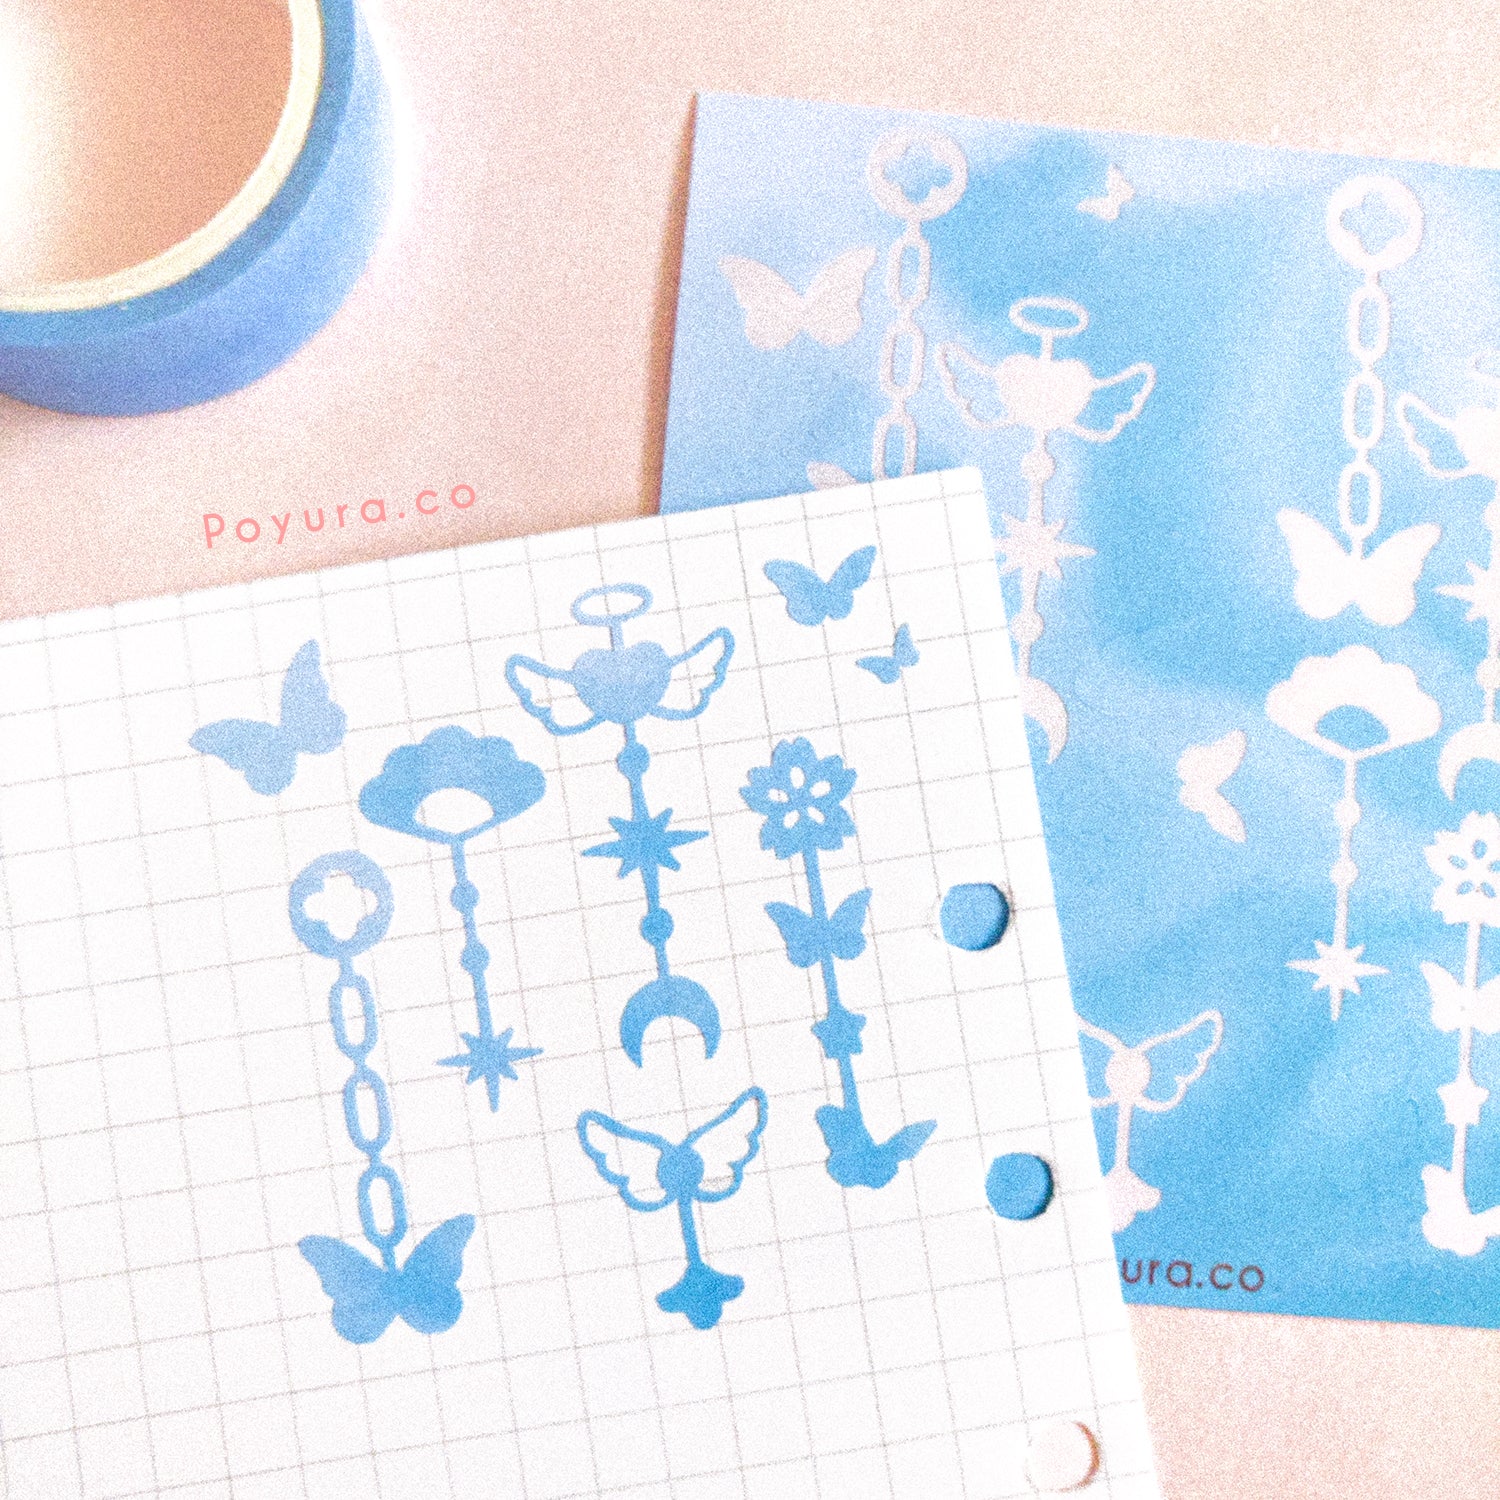 Chains & charms butterfly sparkle polco deco sticker sheet